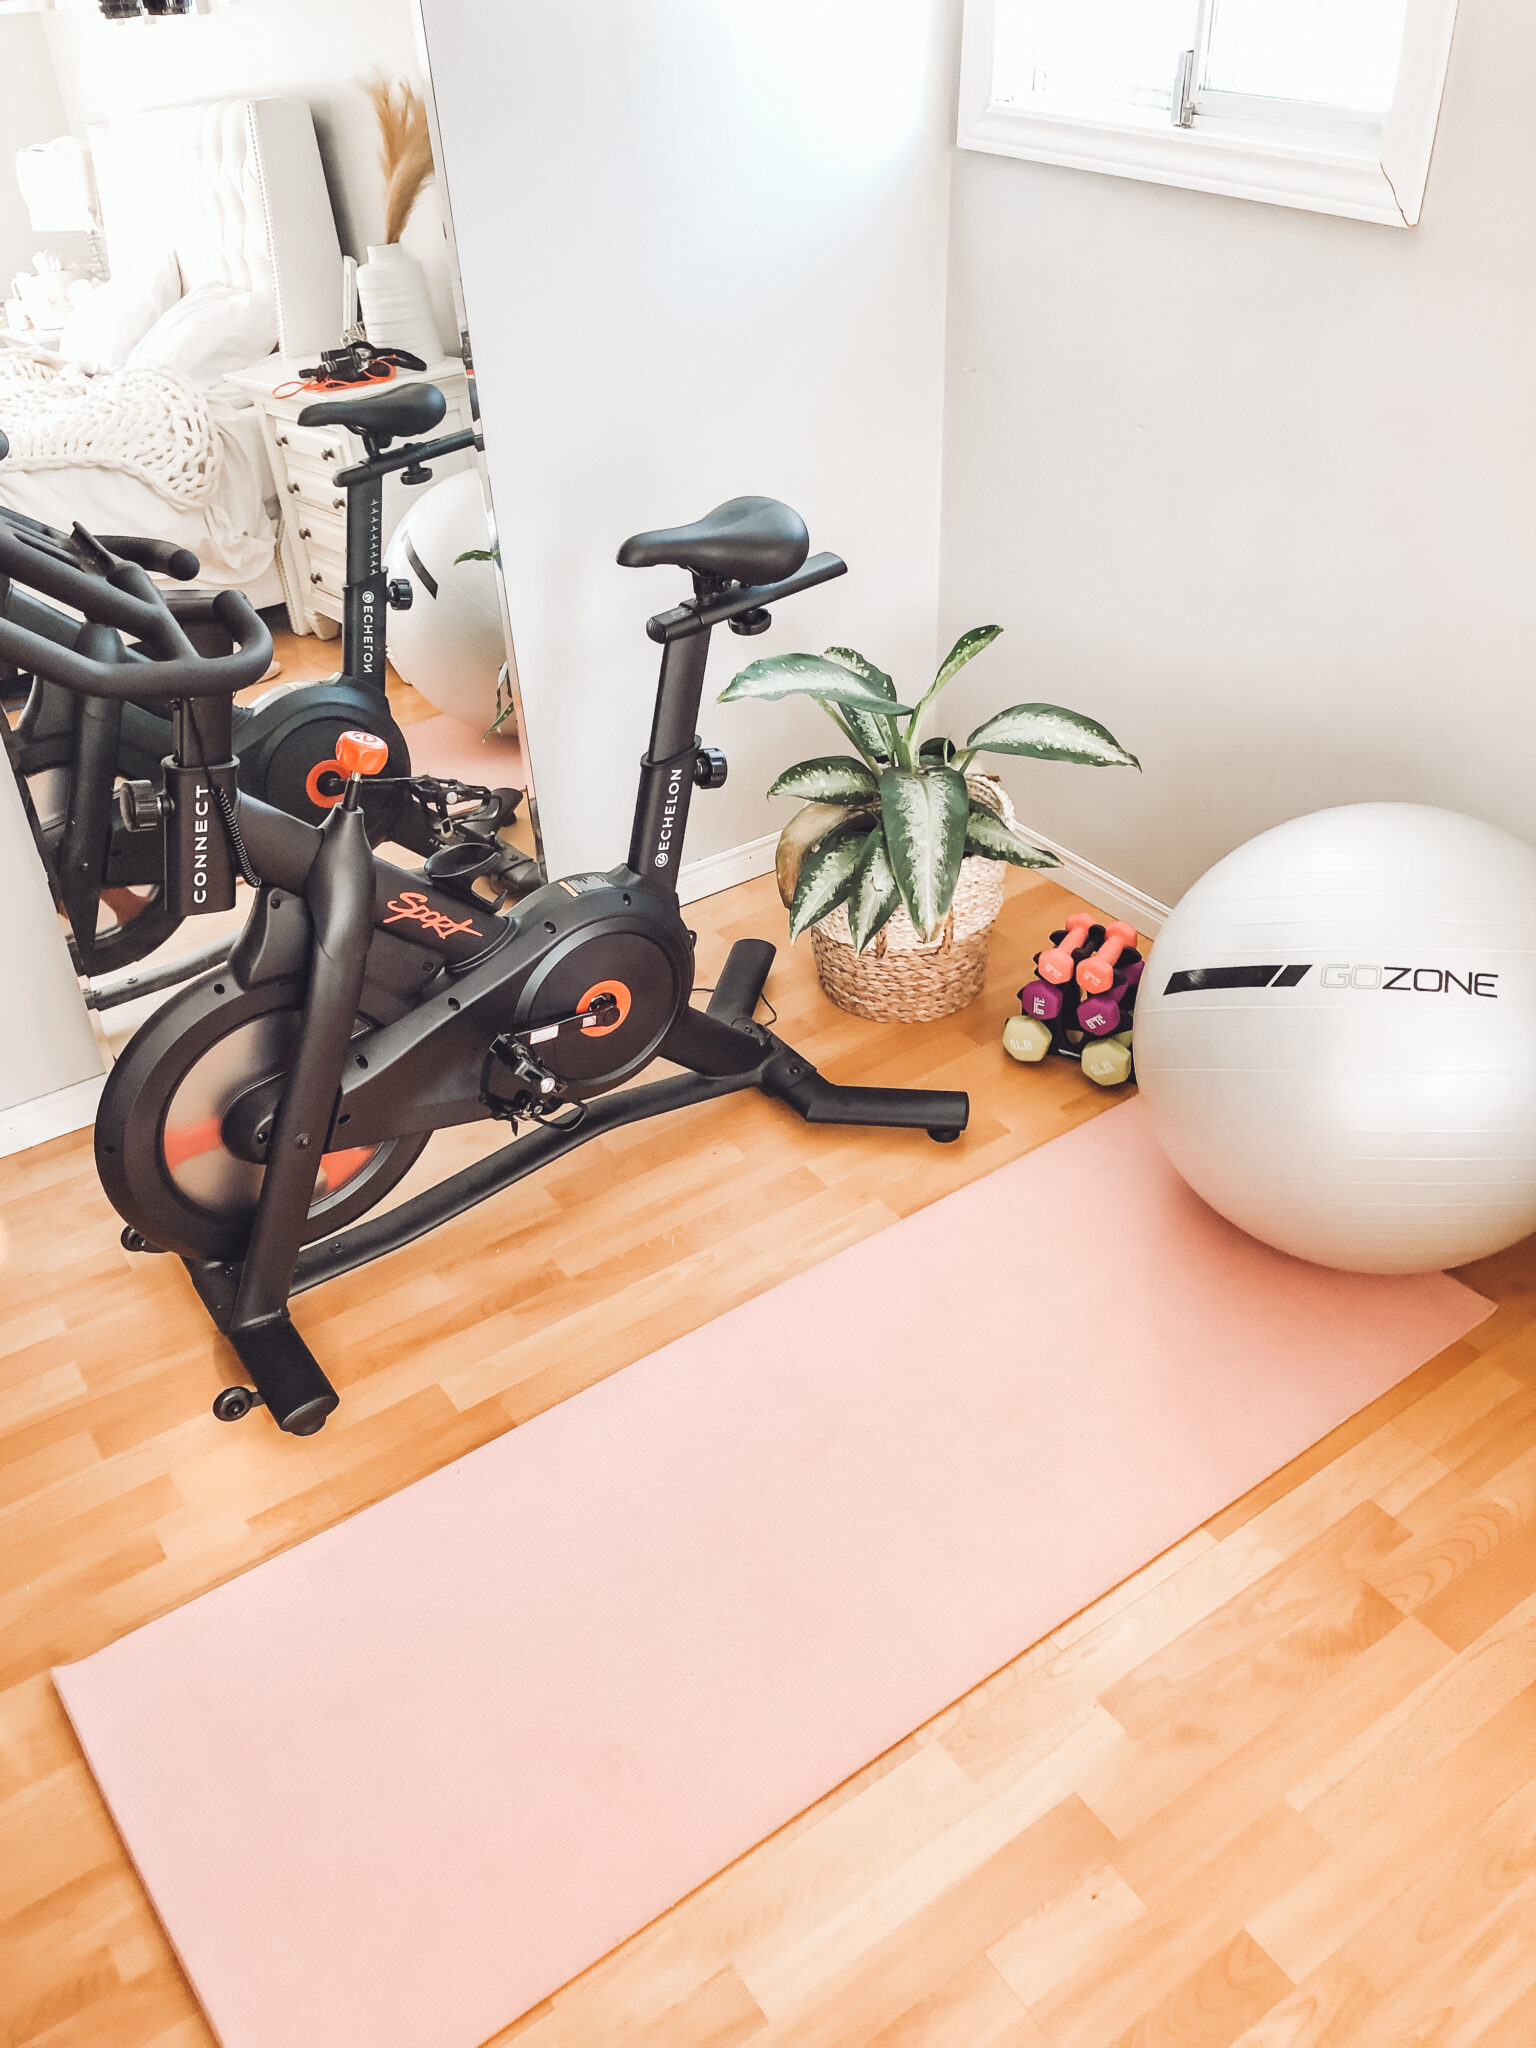 Home gym reveal, perfect for small spaces! Affordable fitness equipment and decor must haves inspiring you to reach your health goals! exercise equipment | fitness | home gym | home gym ideas | home gym reveal | peloton dupe | peloton alternative | small spaces | diy | home decor | gym decor | echelon bike | exercise bike | home workout | amazon | walmart | healthy living | weight loss | small gym space | spin bike | gozone 